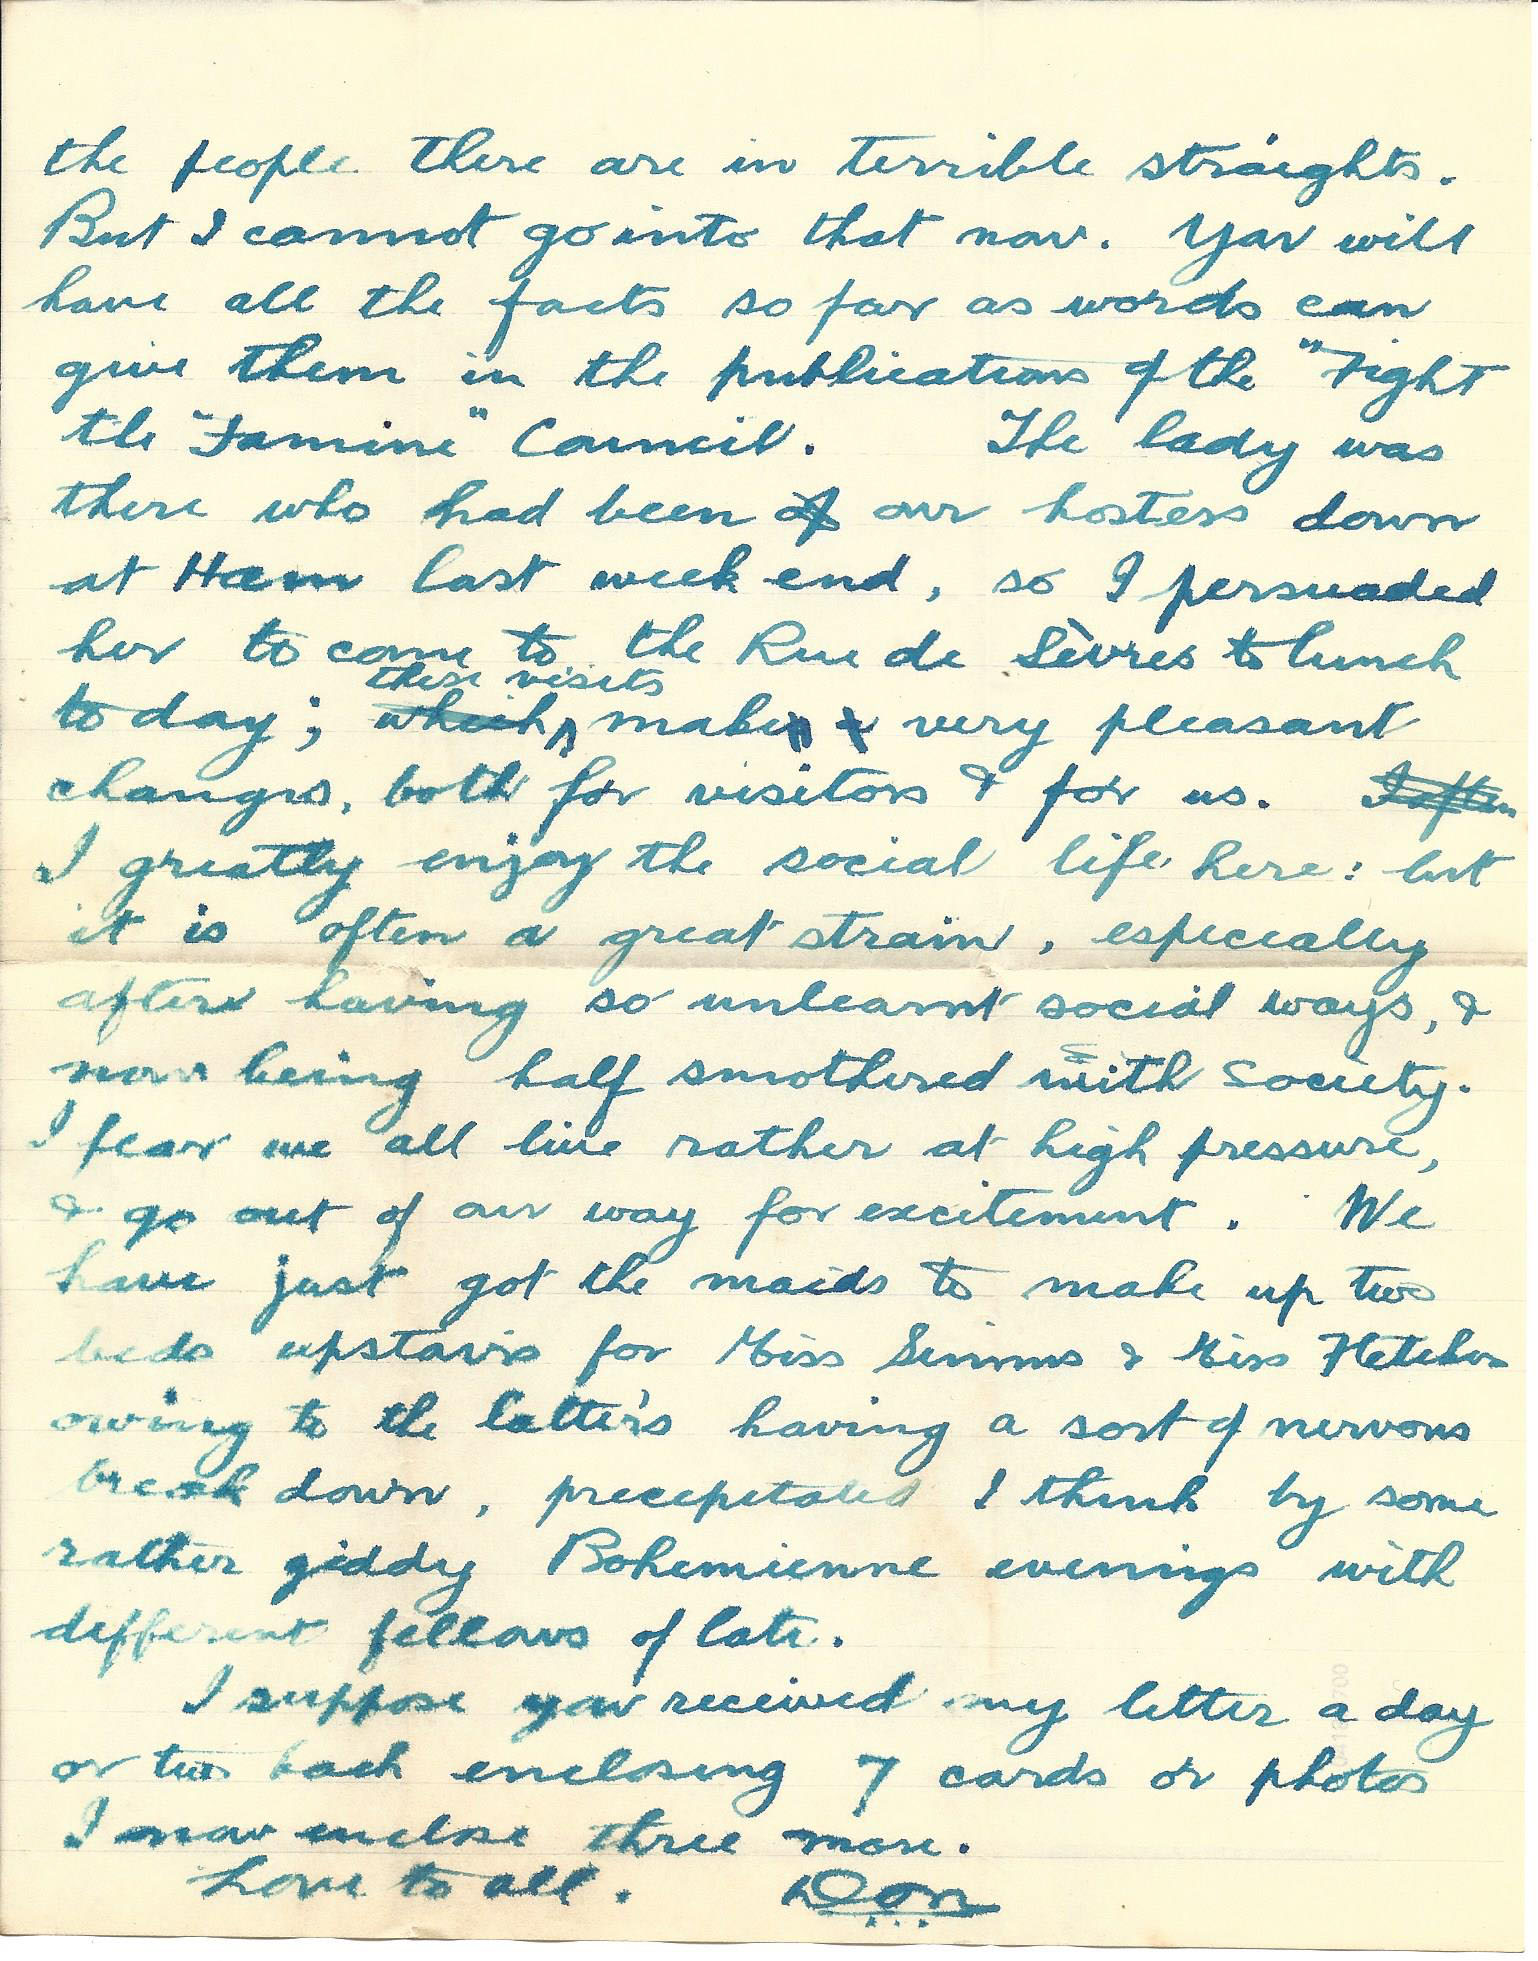 1919-09-19 p2 Donald Bearman letter to his father